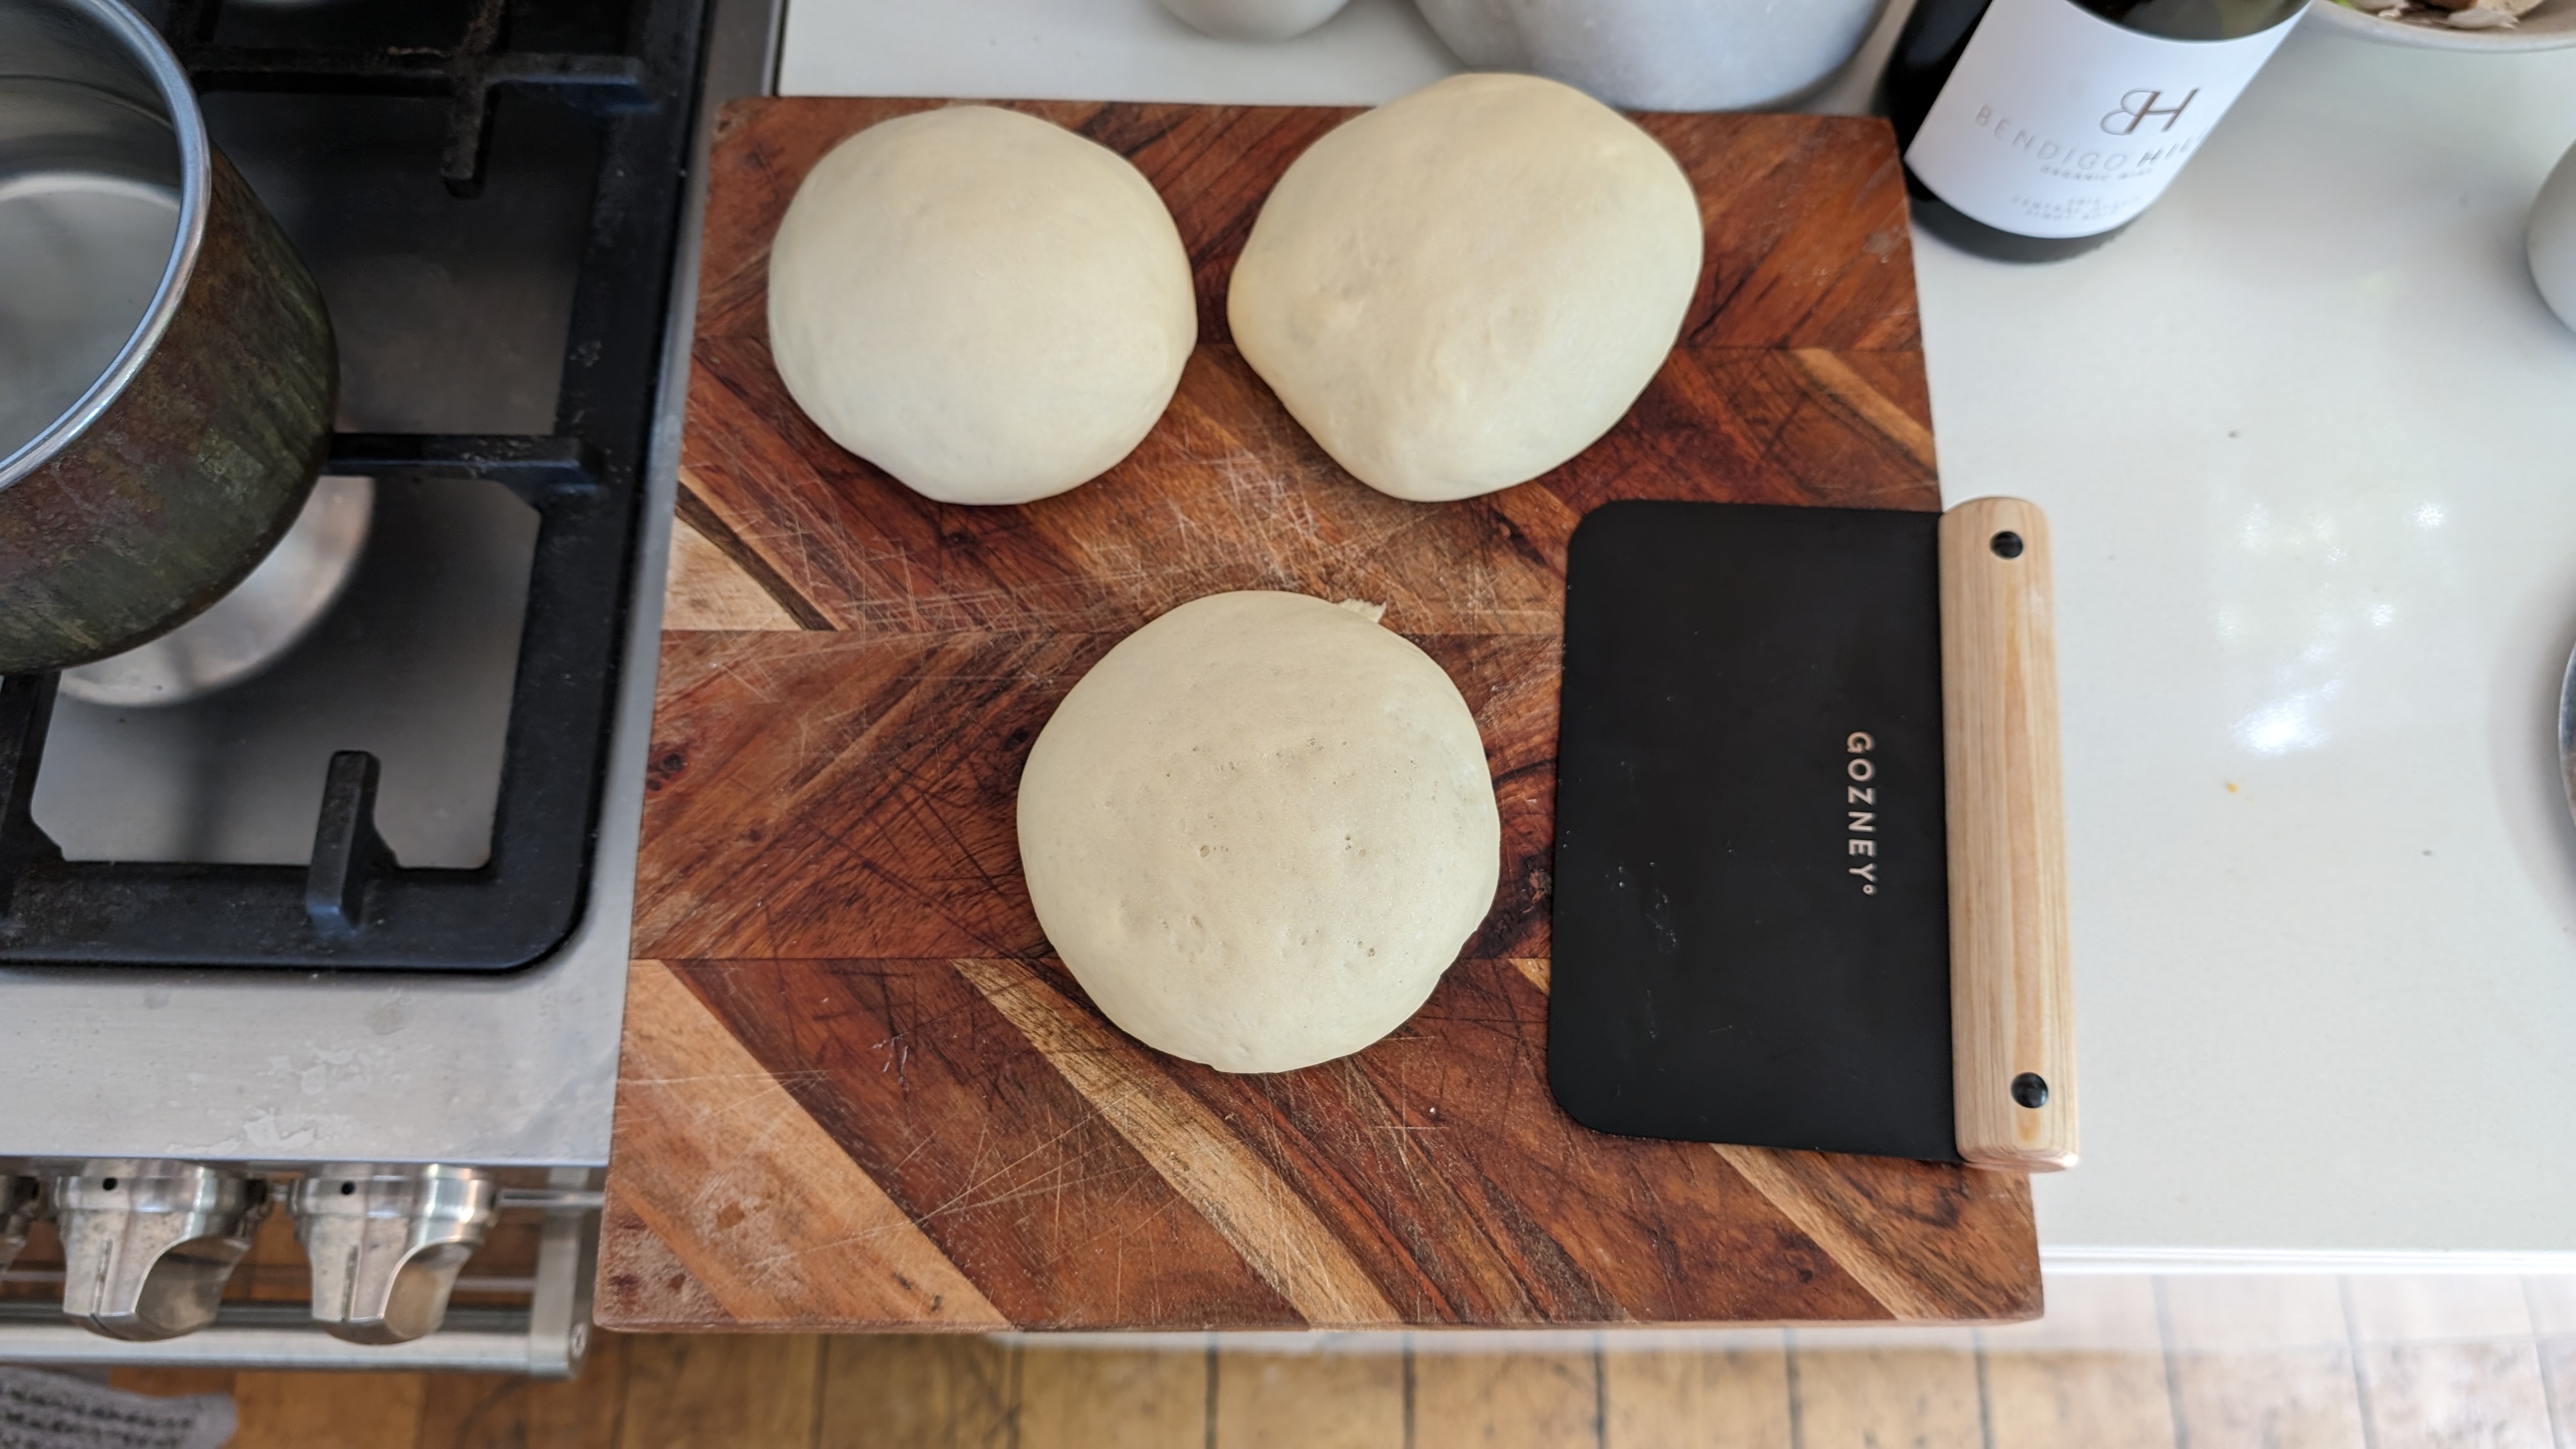 Making pizza and bread on the Roccbox